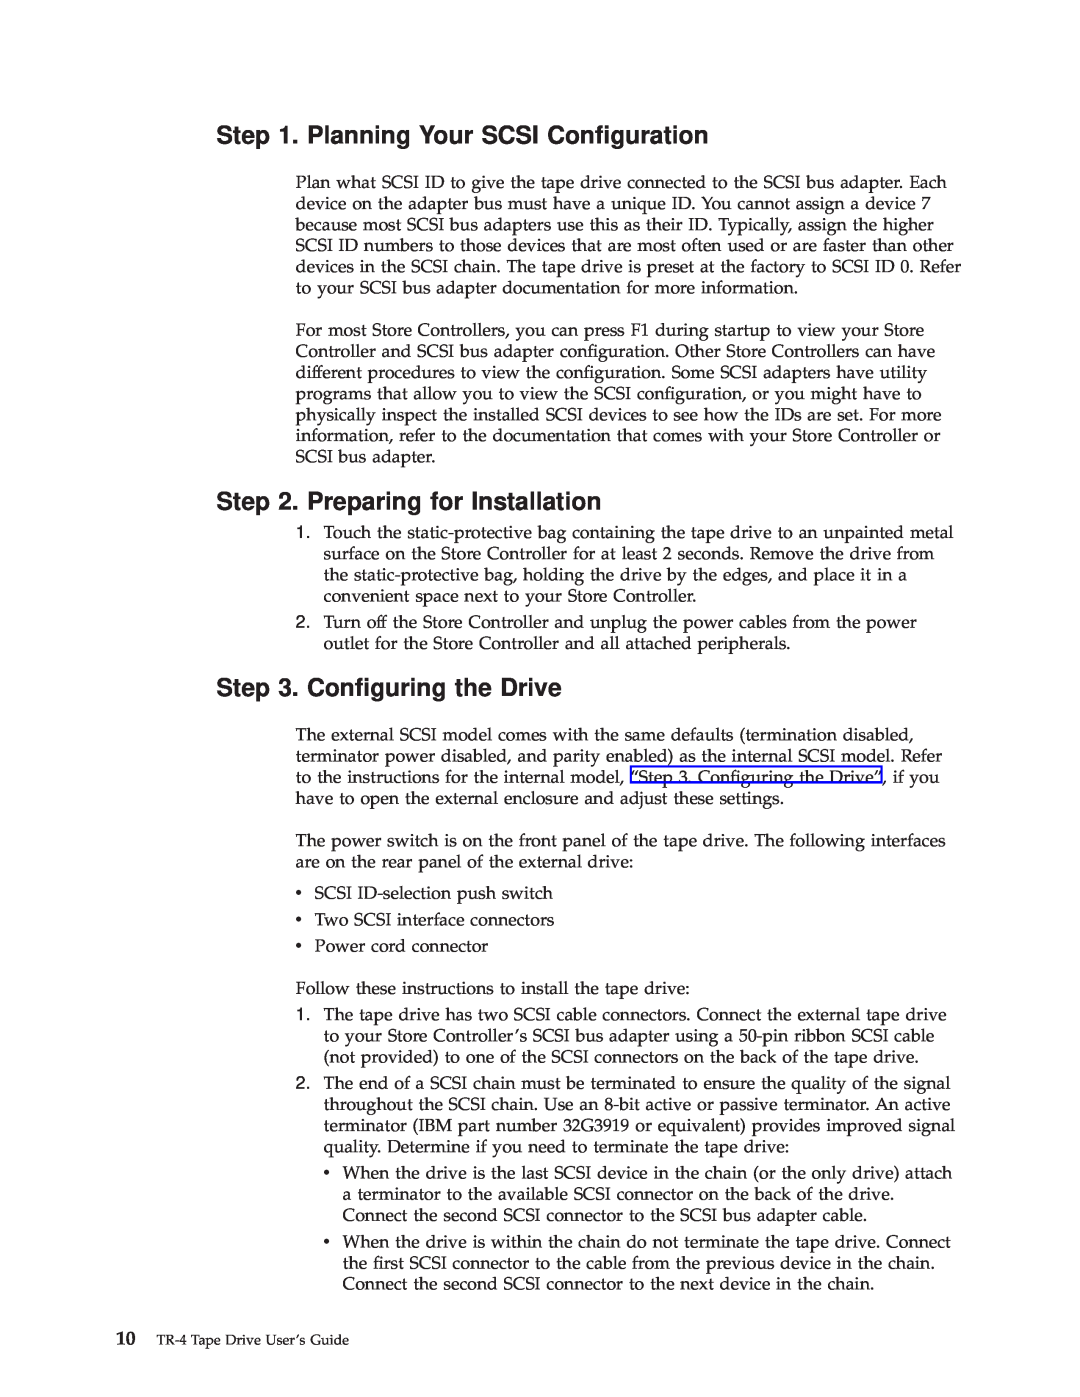 IBM 4690 manual Conguring the Drive, Planning Your SCSI Conguration, Preparing for Installation 